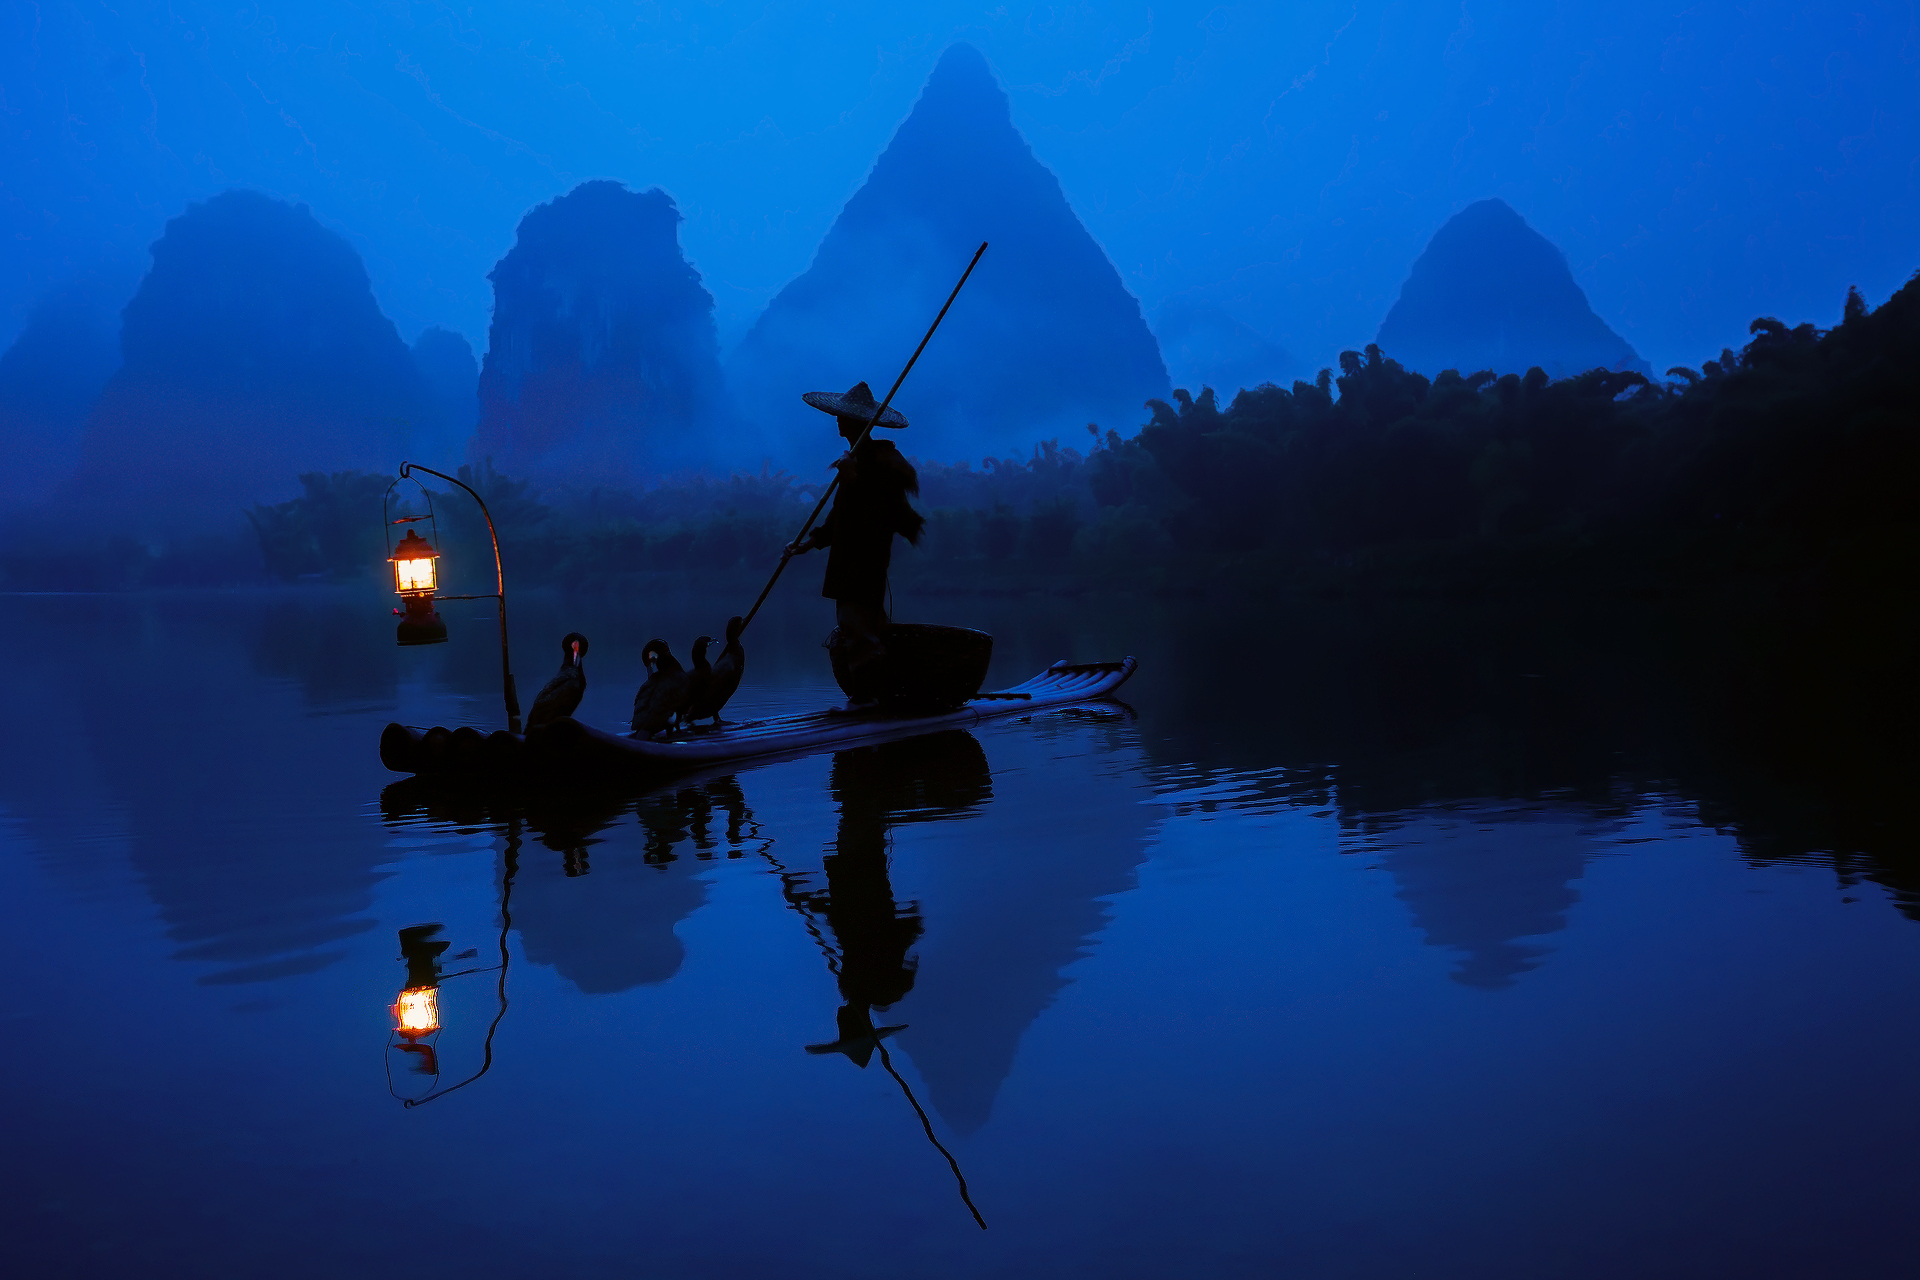 asia, landscape, people, rivers, pictures, boats, blue